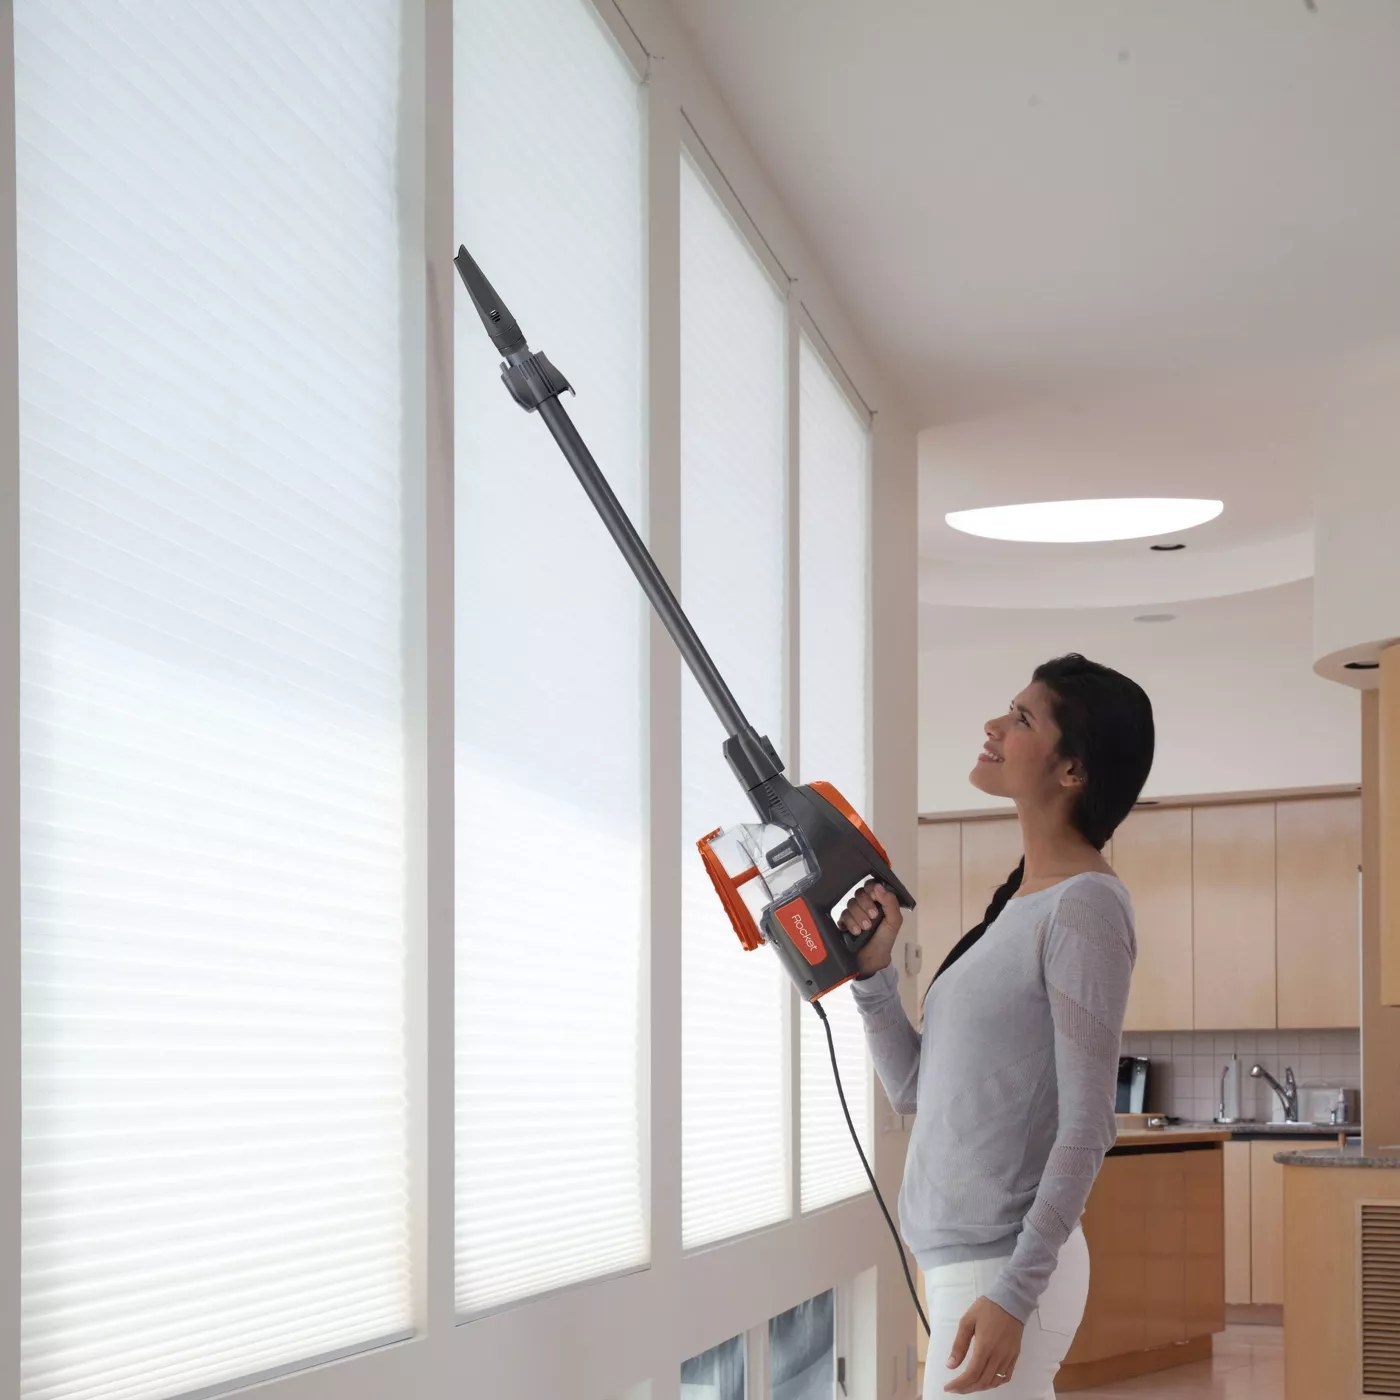 A model using the vacuum to clean the shades